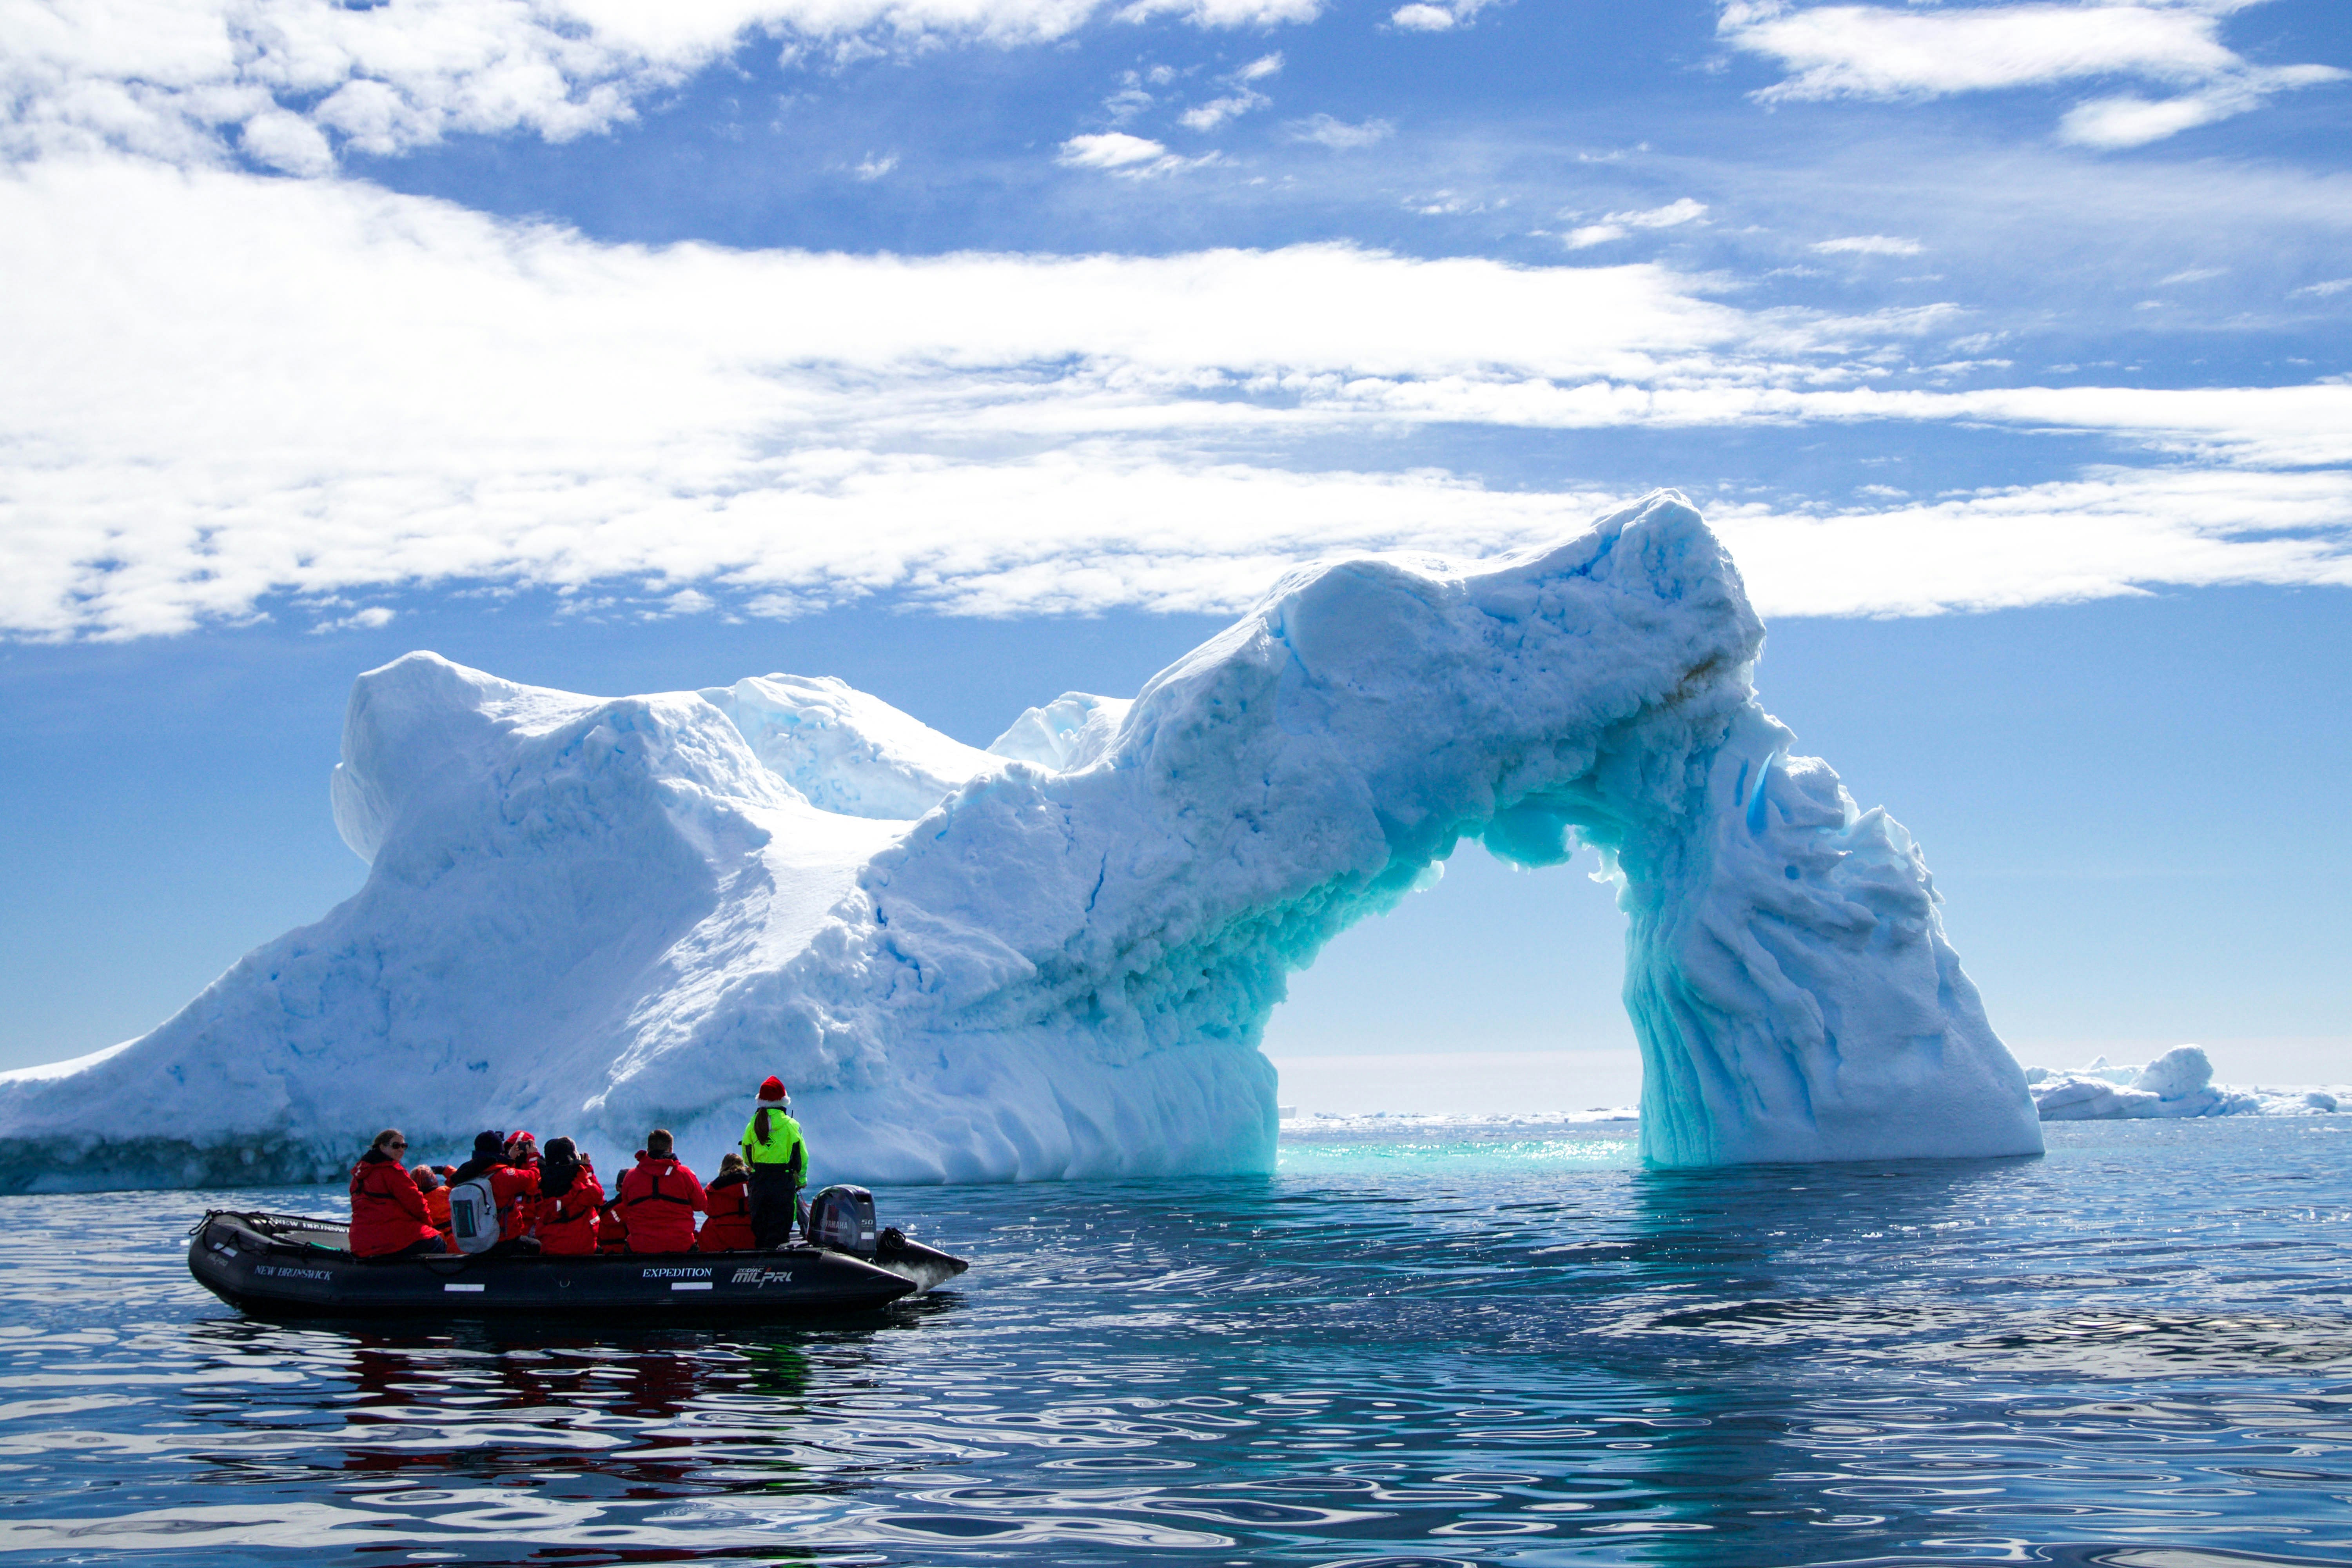 Antarctica holds vital clues to mitigating climate change and is often described as a natural laboratory. : Image by Dylan Shaw available at https://tinyurl.com/3yfefj84 Unsplash License